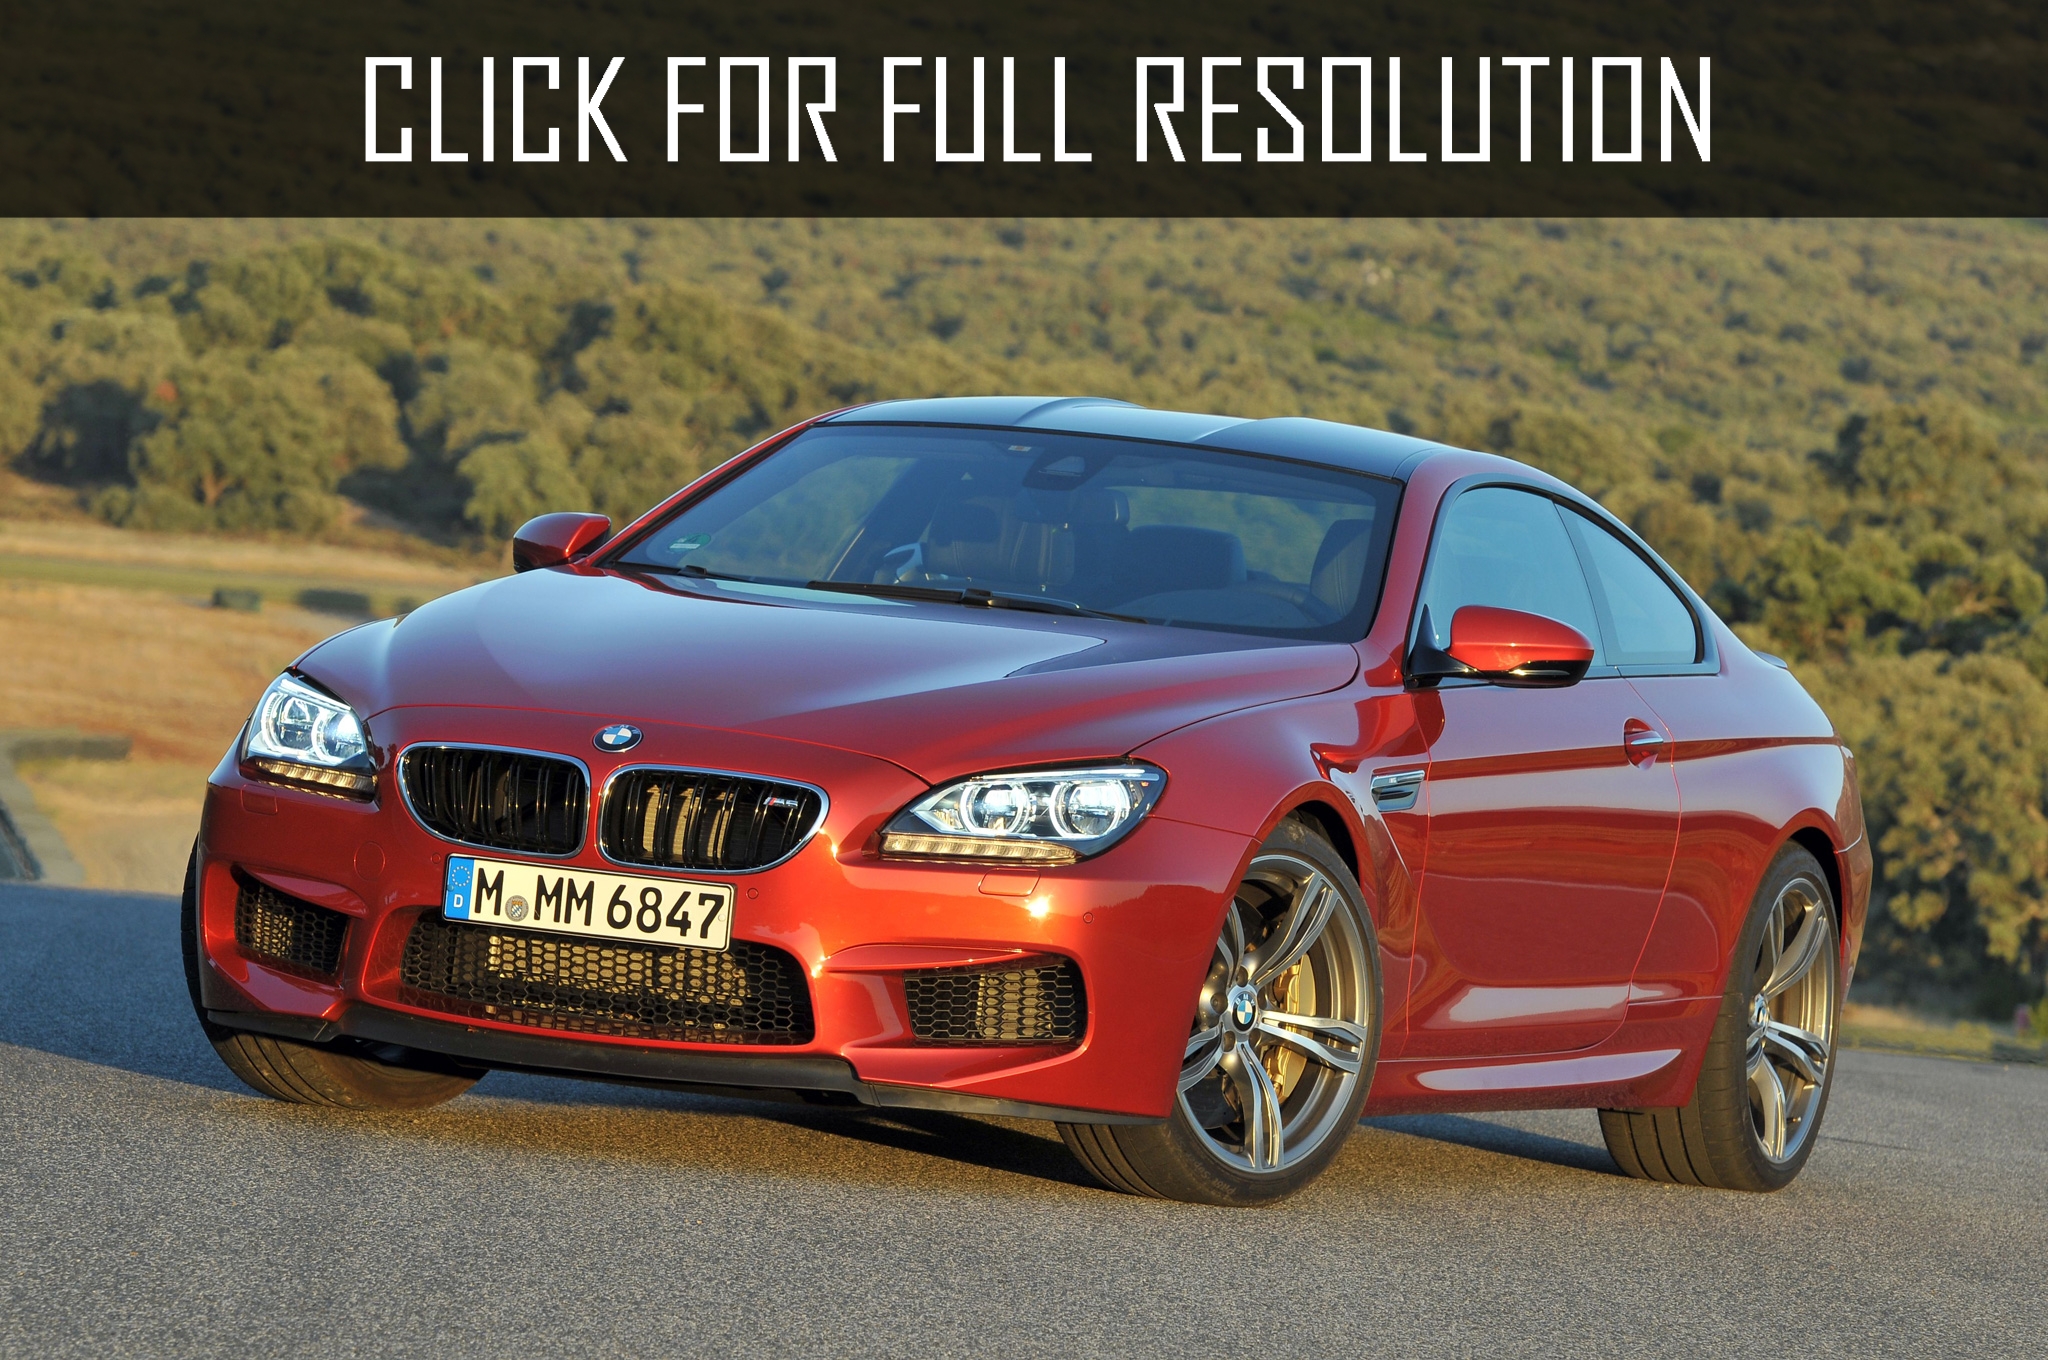 2013 Bmw M6 Coupe